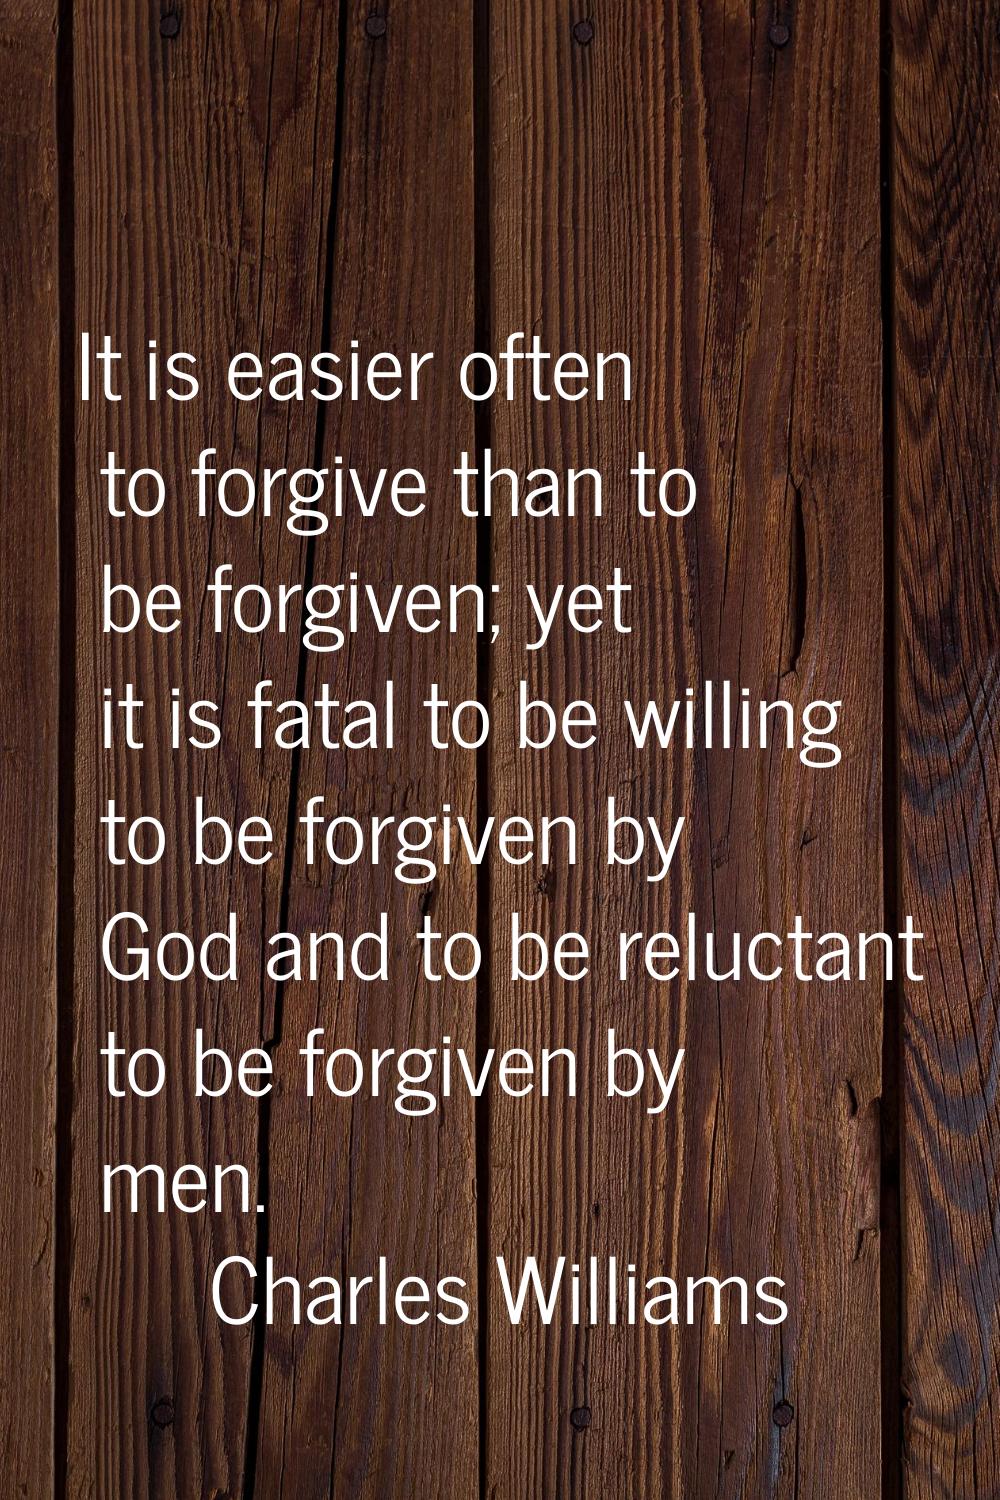 It is easier often to forgive than to be forgiven; yet it is fatal to be willing to be forgiven by 